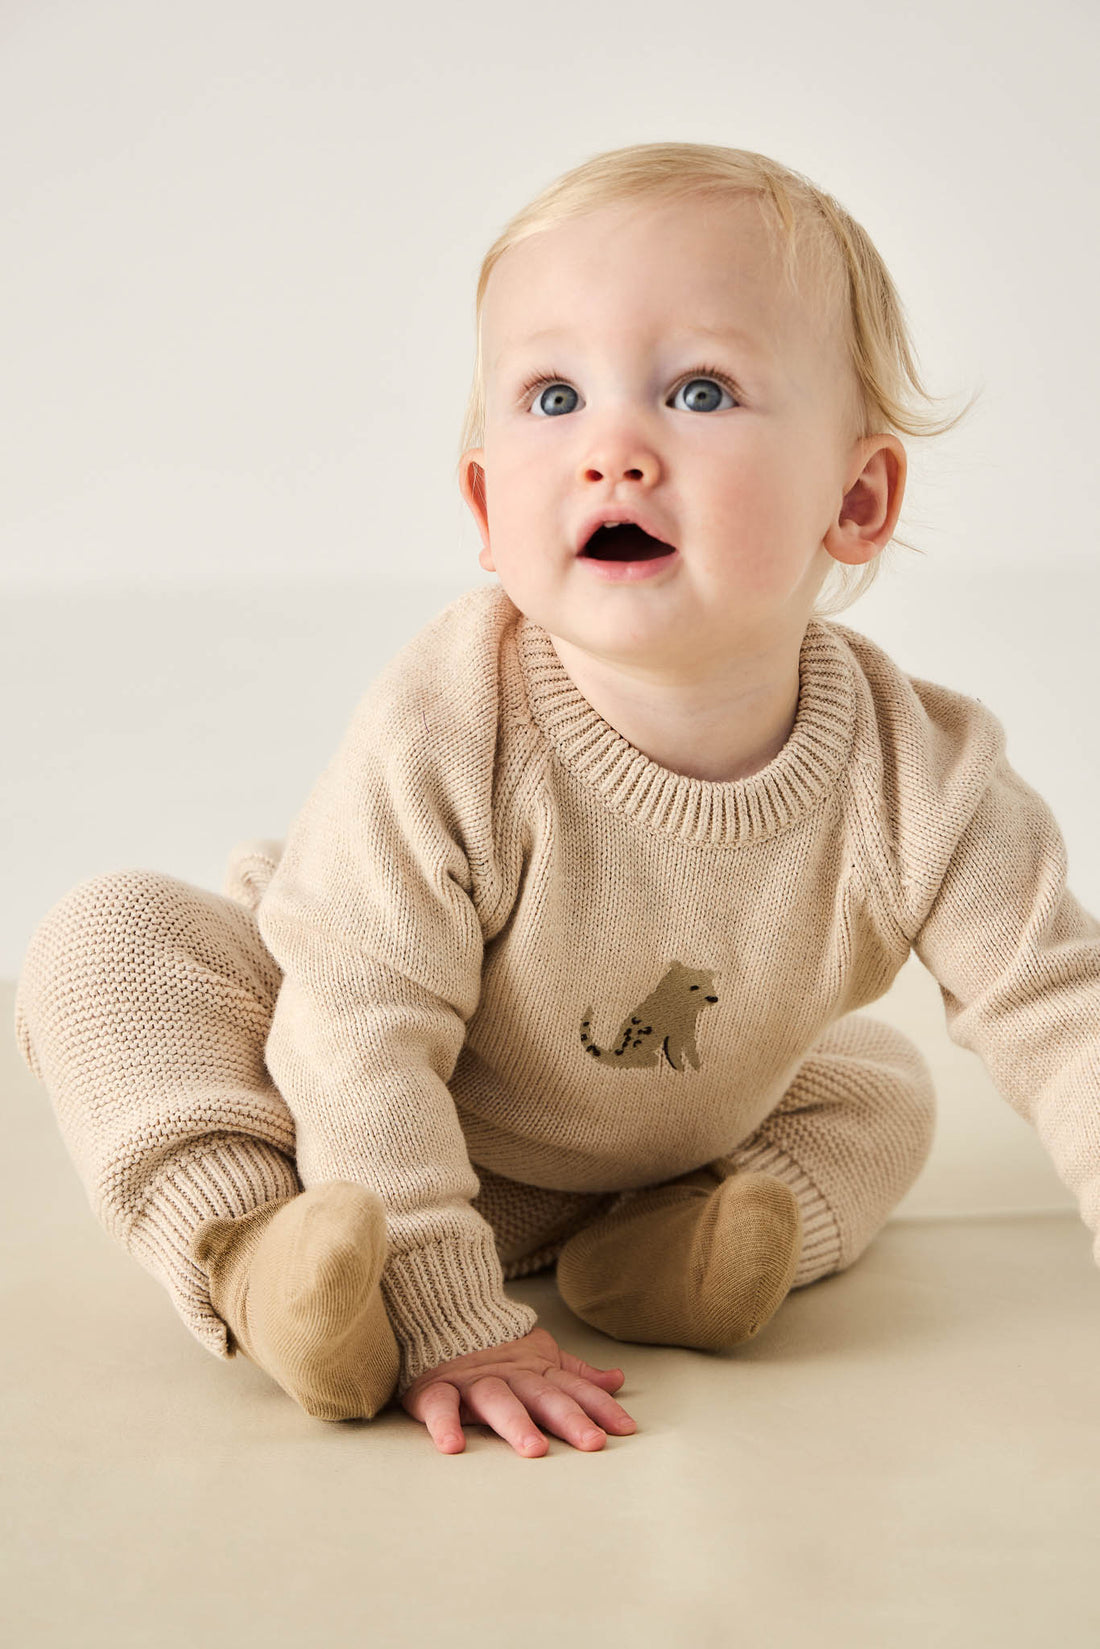 Ethan Jumper - Oatmeal Marle Leopard Childrens Jumper from Jamie Kay NZ